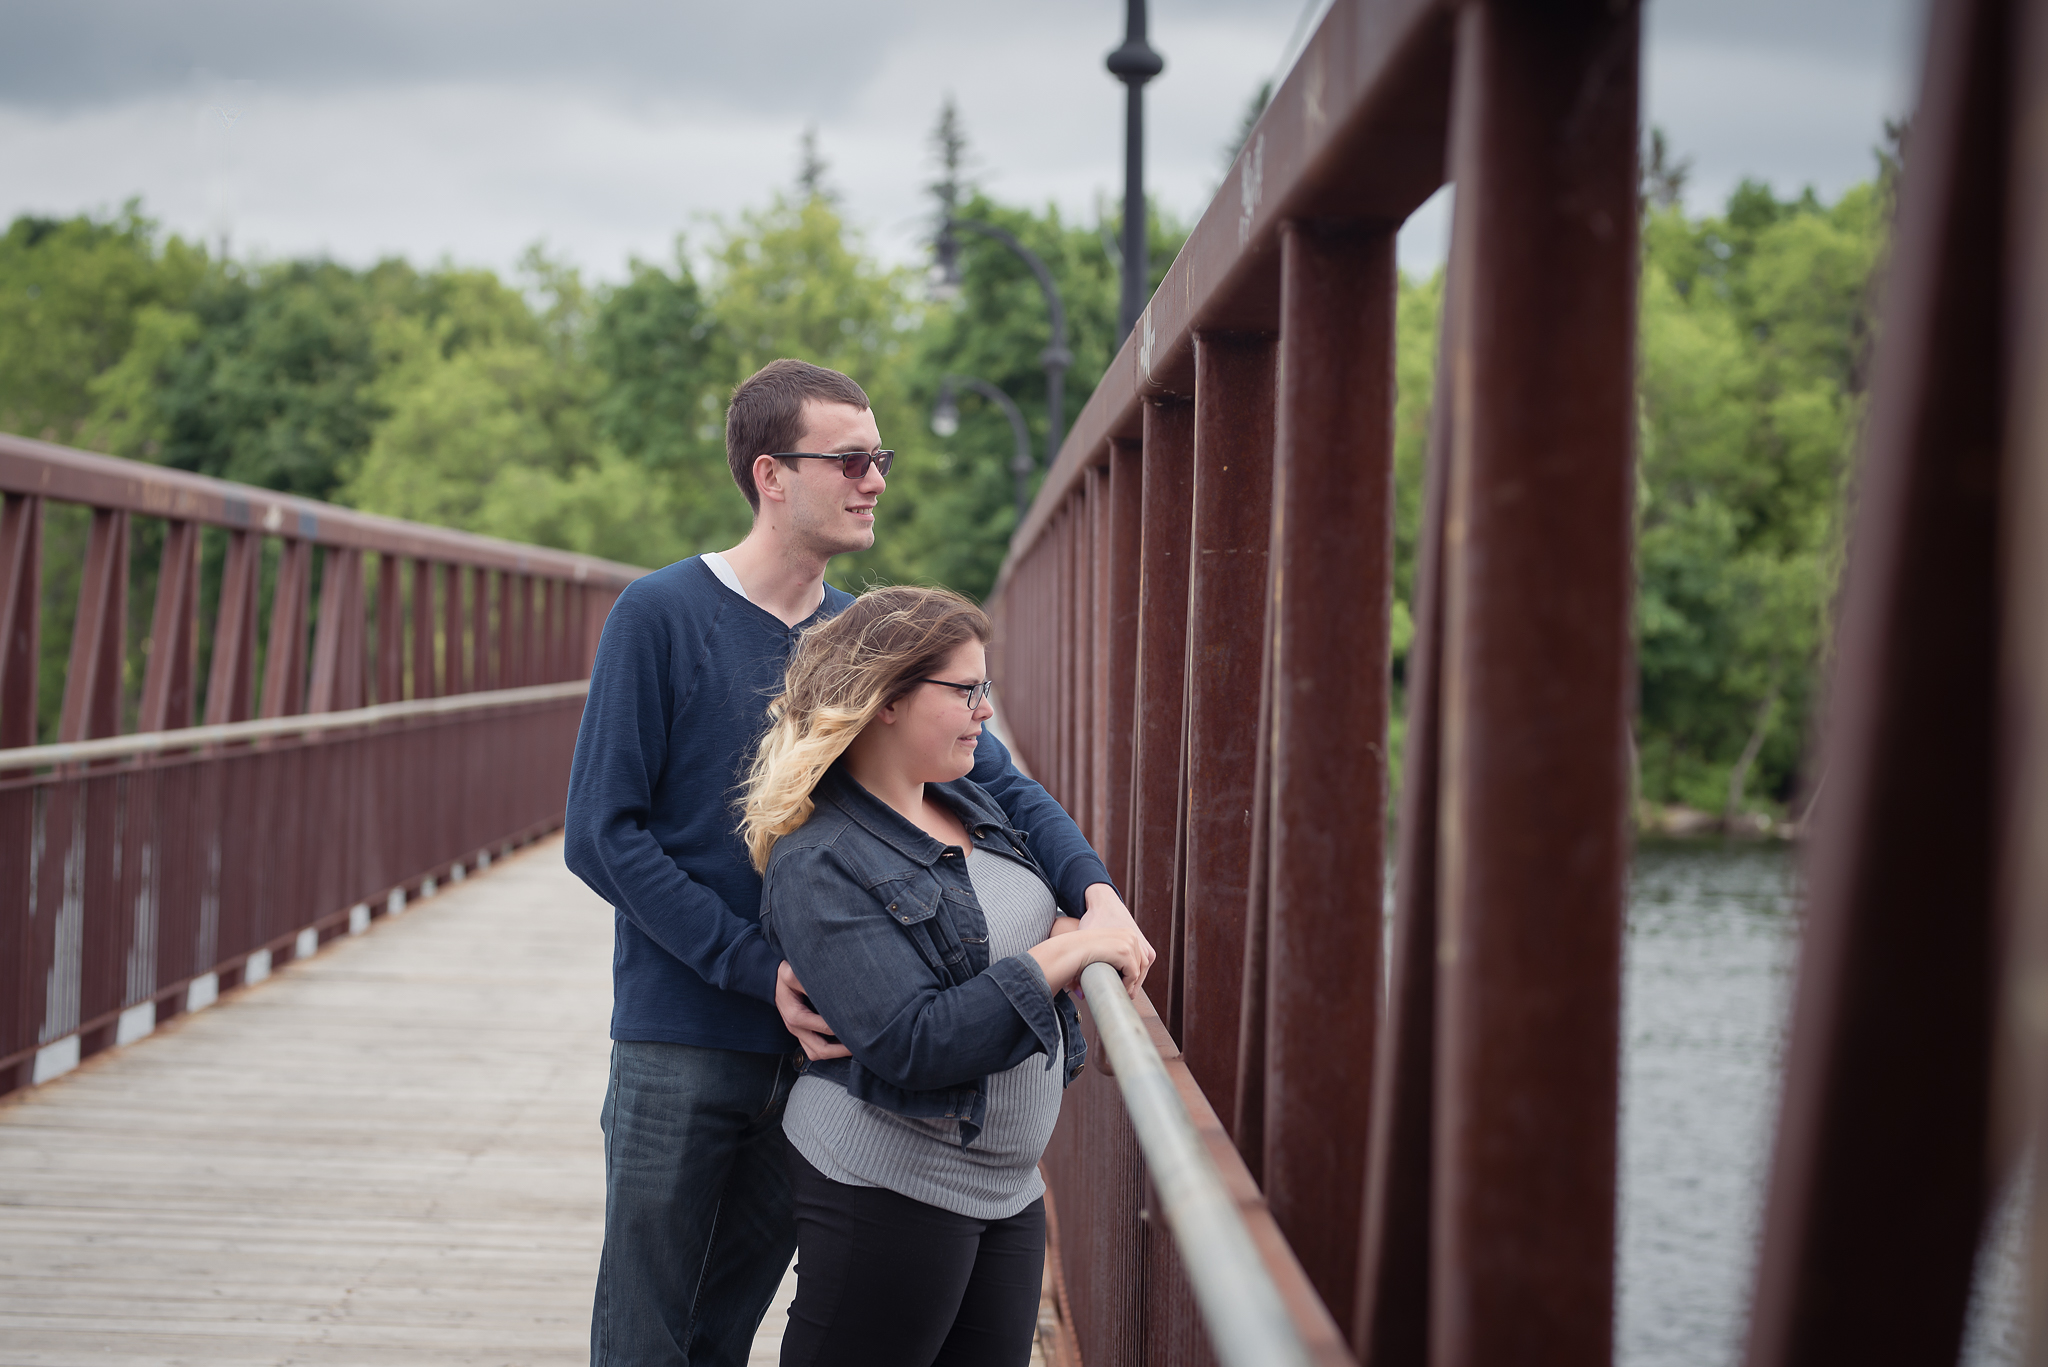 Couples88NaomiLuciennePhotography062018-2-Edit.jpg